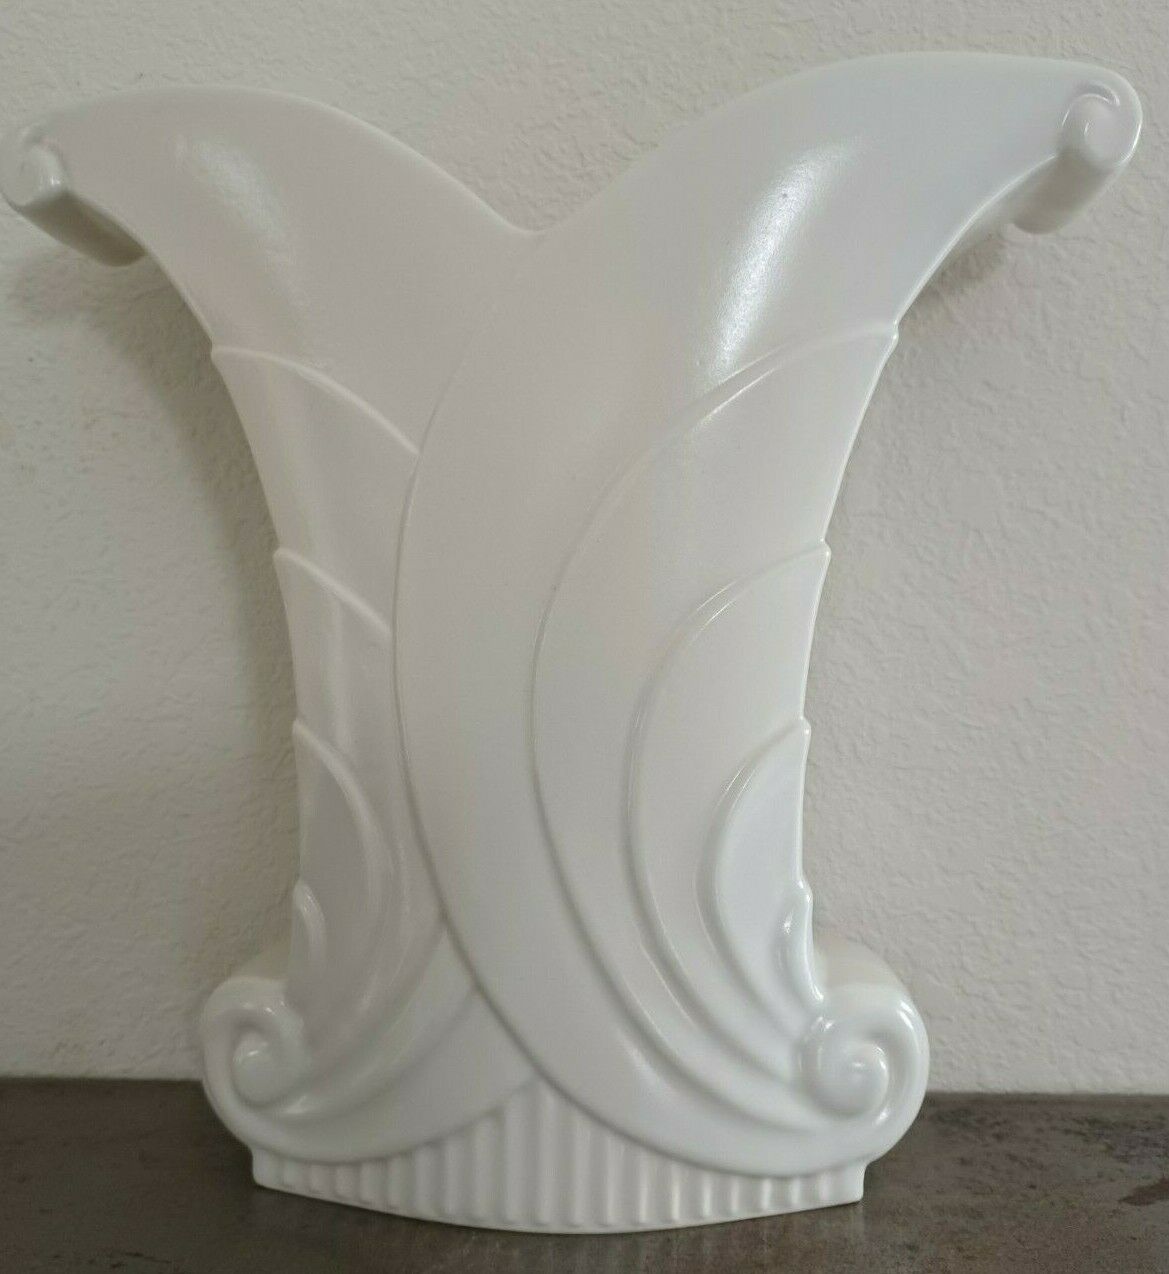 White Abingdon 514 Vase Height 11" Width 11.75" At The Top